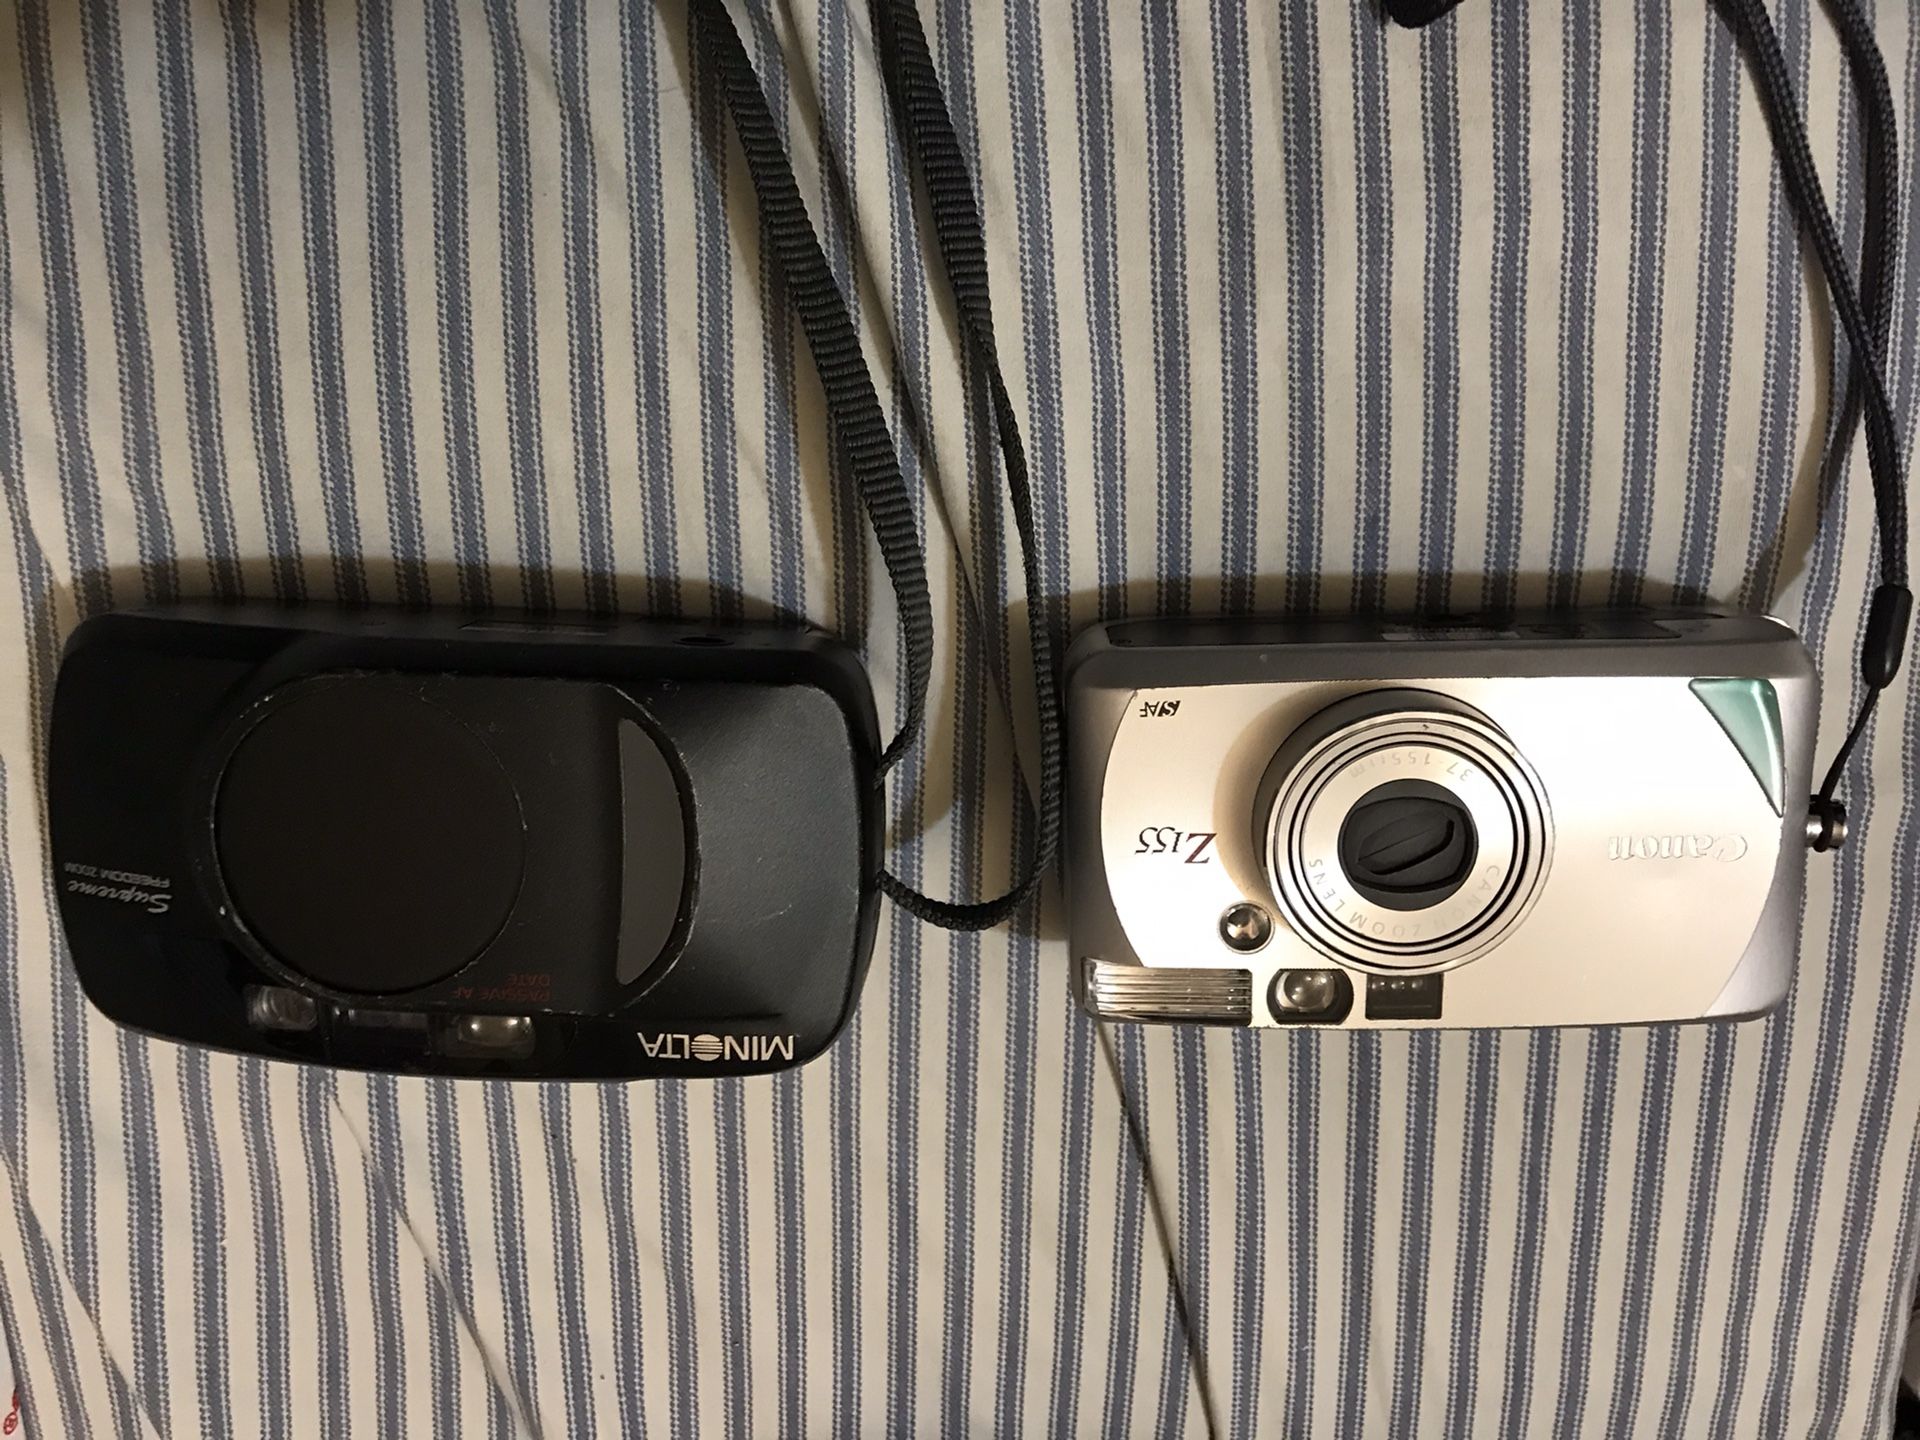 Two cameras